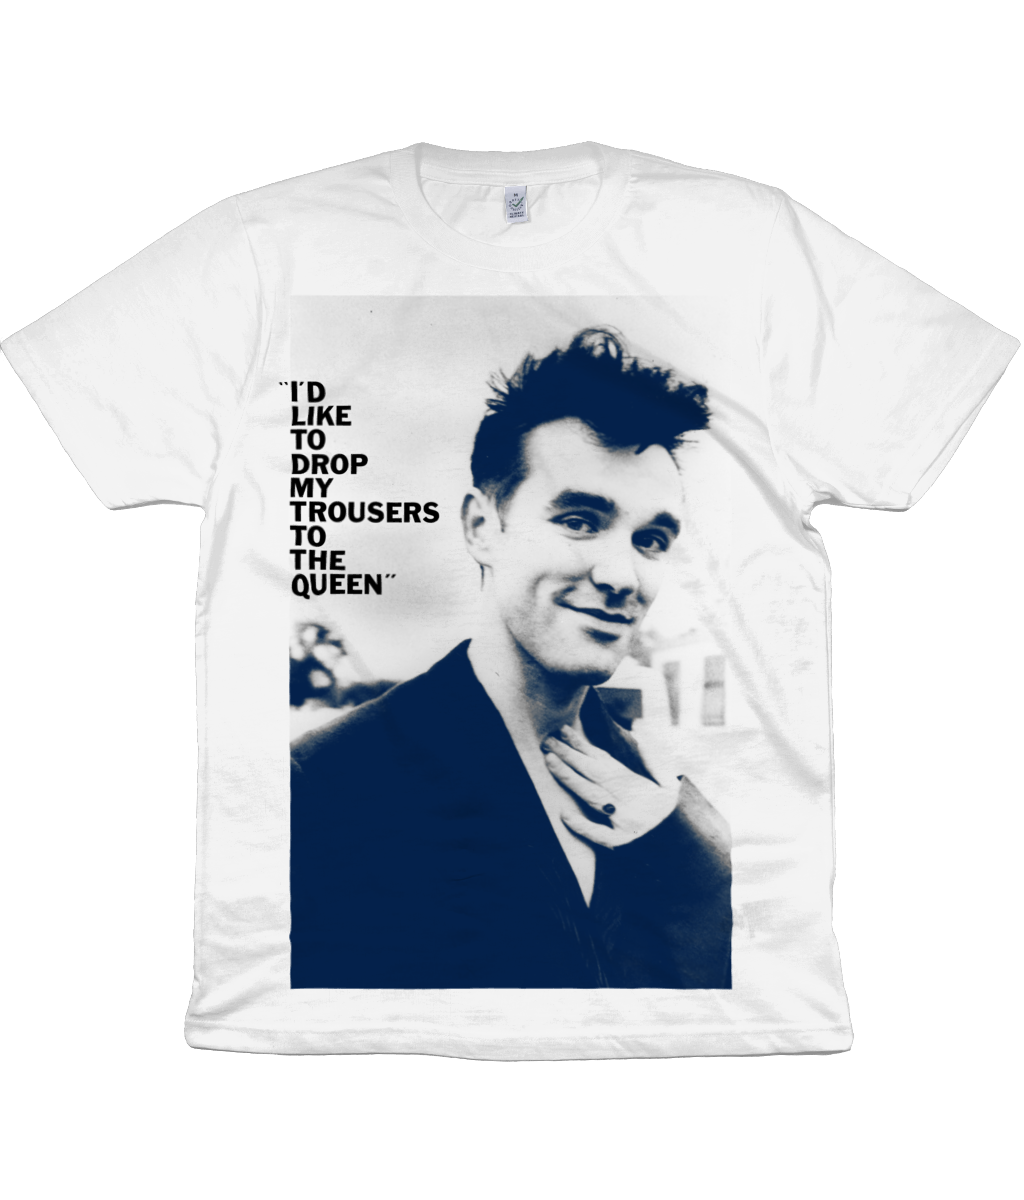 The Smiths - "I'D LIKE TO DROP MY TROUSERS TO THE QUEEN" - 1985 - Indigo Blue